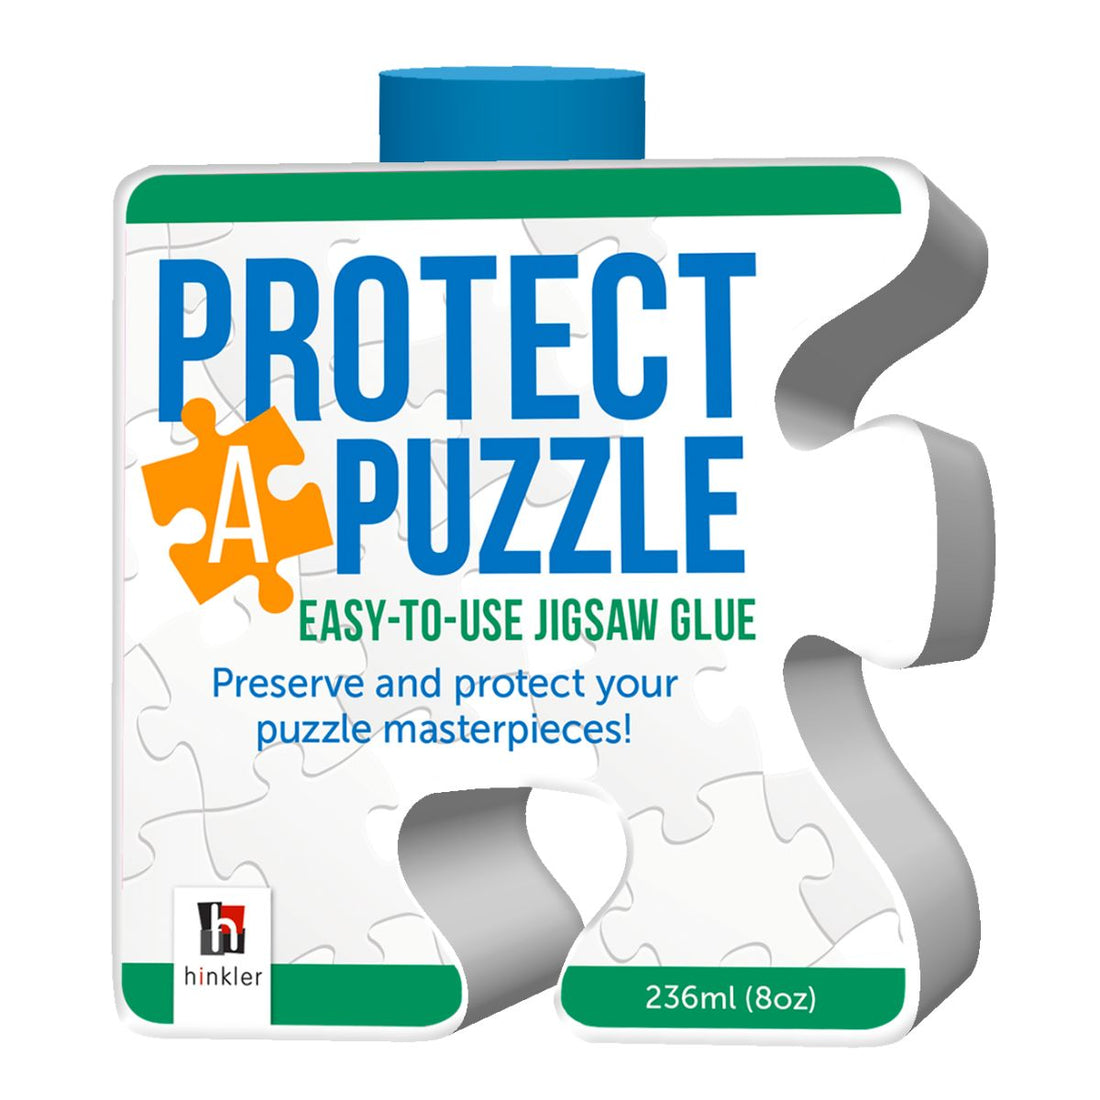 Protect a puzzle jigsaw glue to protect puzzles